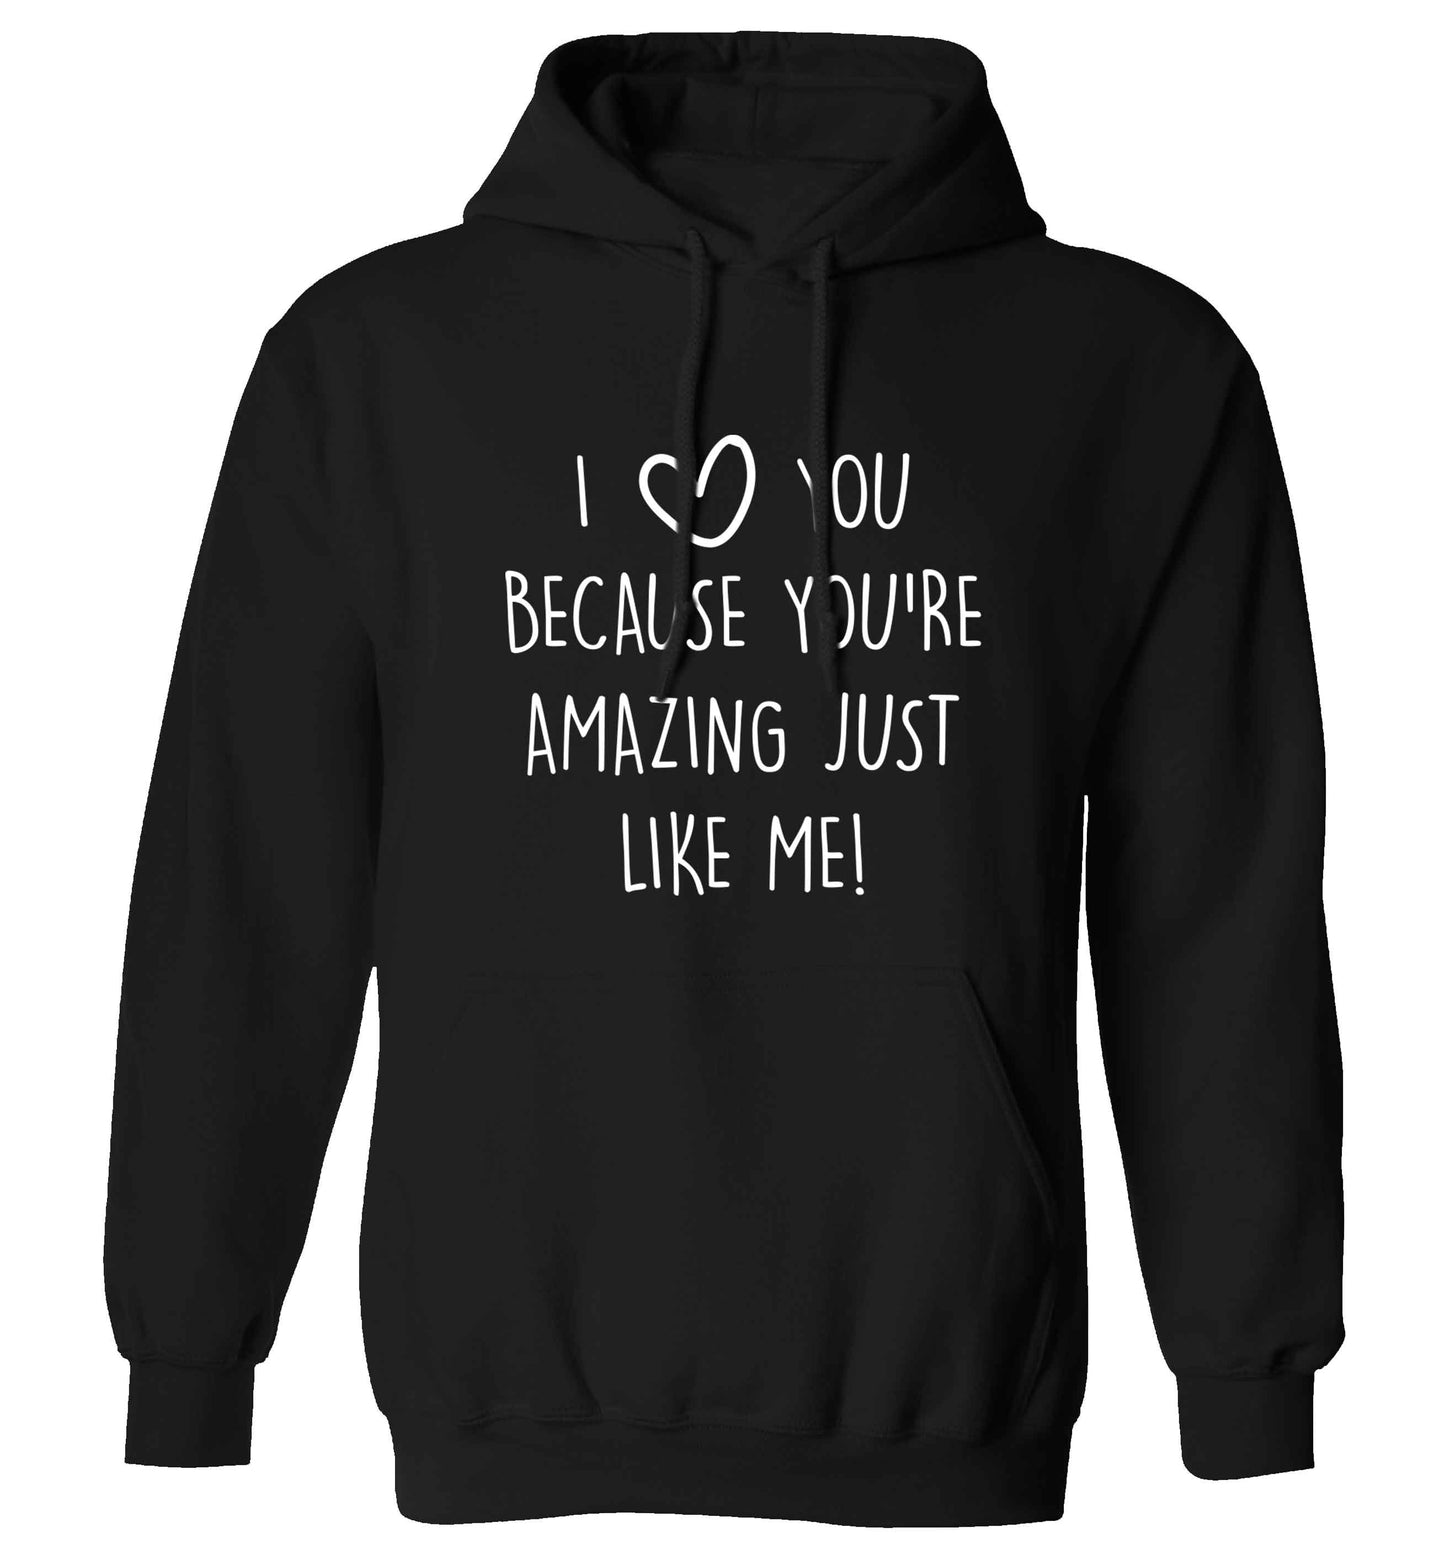 I love you because you're amazing just like me adults unisex black hoodie 2XL